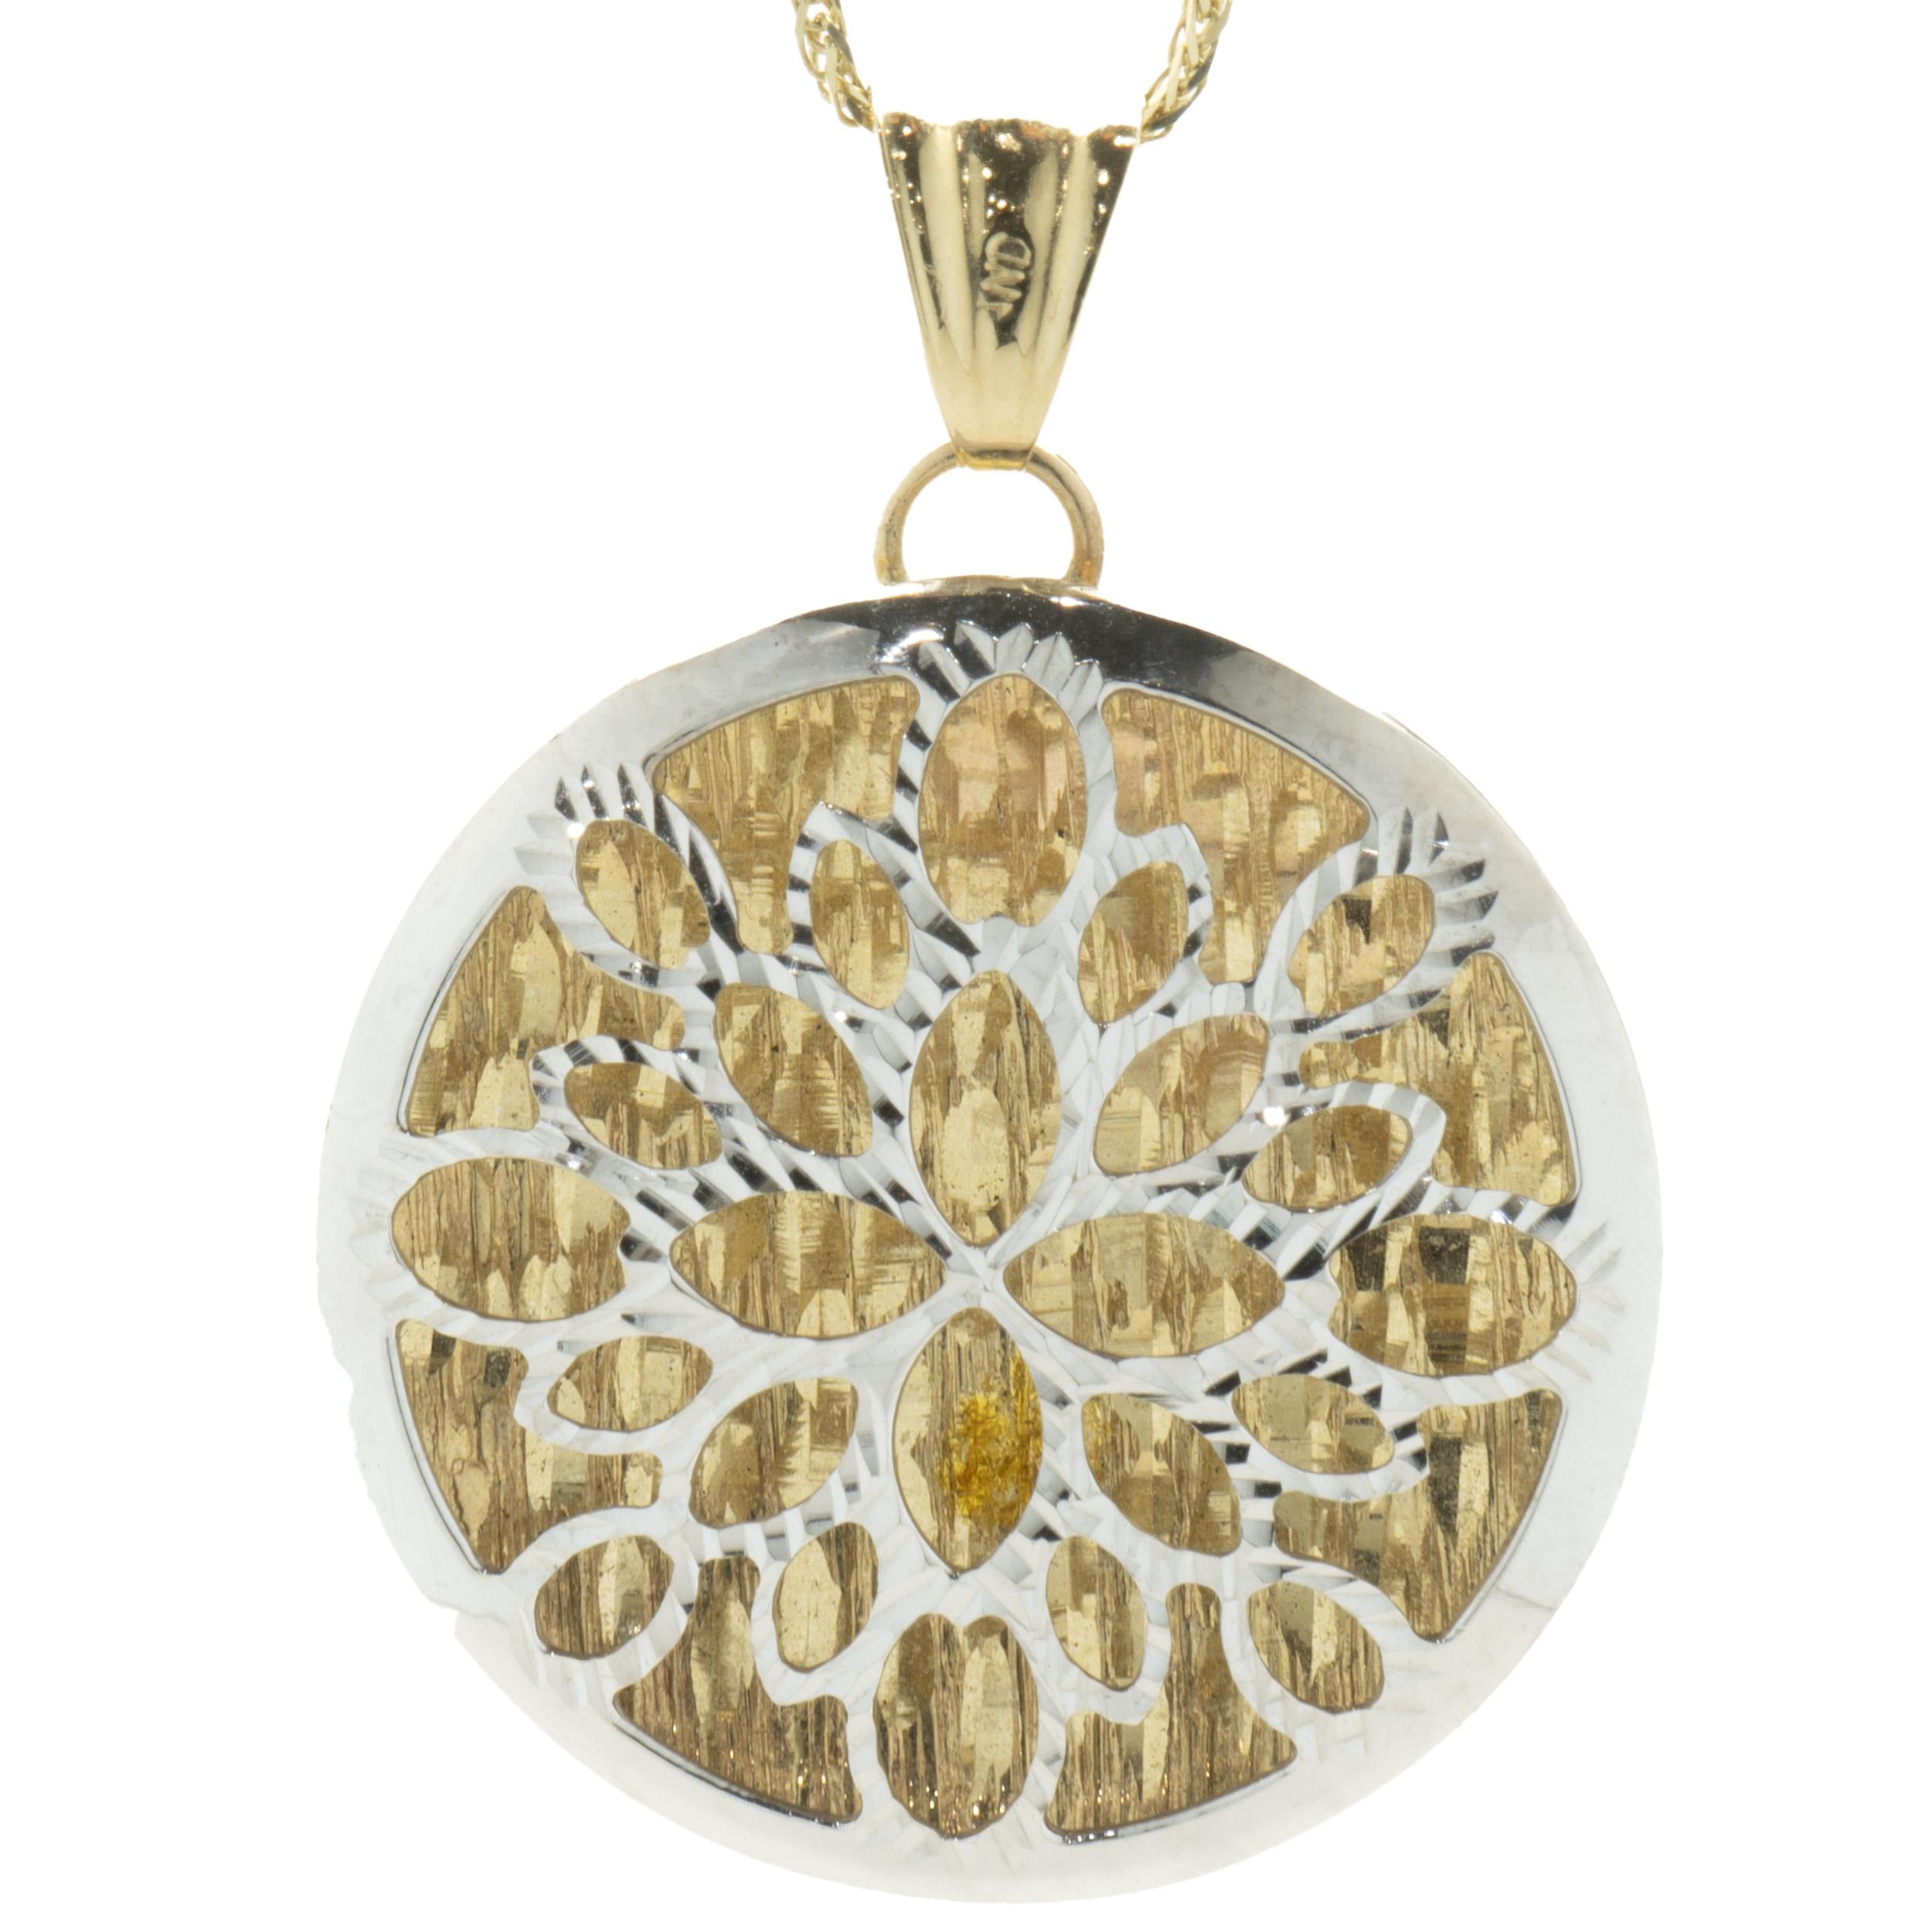 Designer: custom
Material: 14K yellow & white gold 
Dimensions: necklace measures 18-inches in length
Weight: 3.09 grams